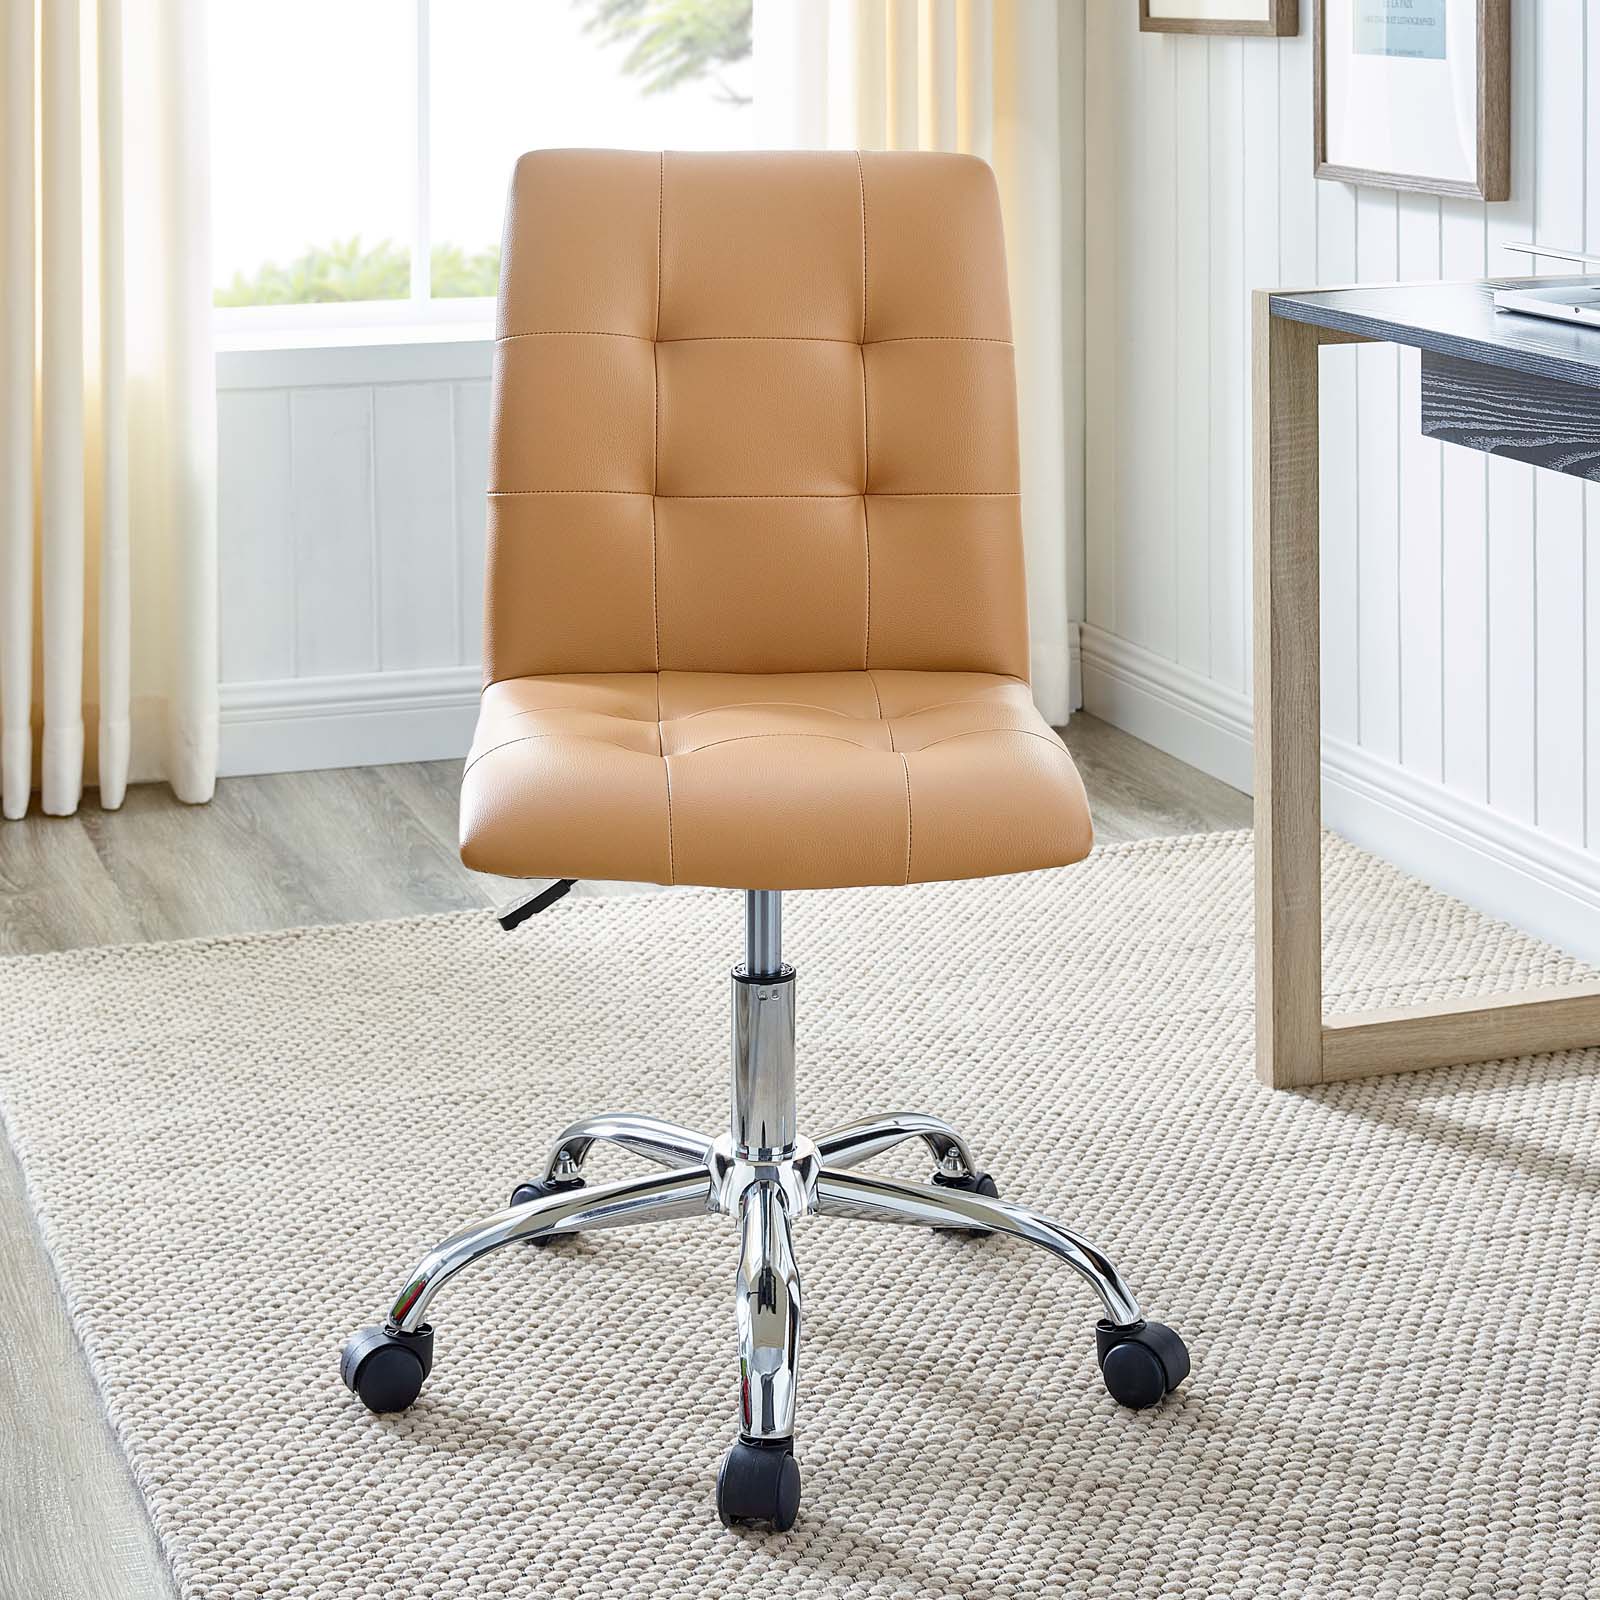 Prim Armless Mid Back Office Chair - East Shore Modern Home Furnishings